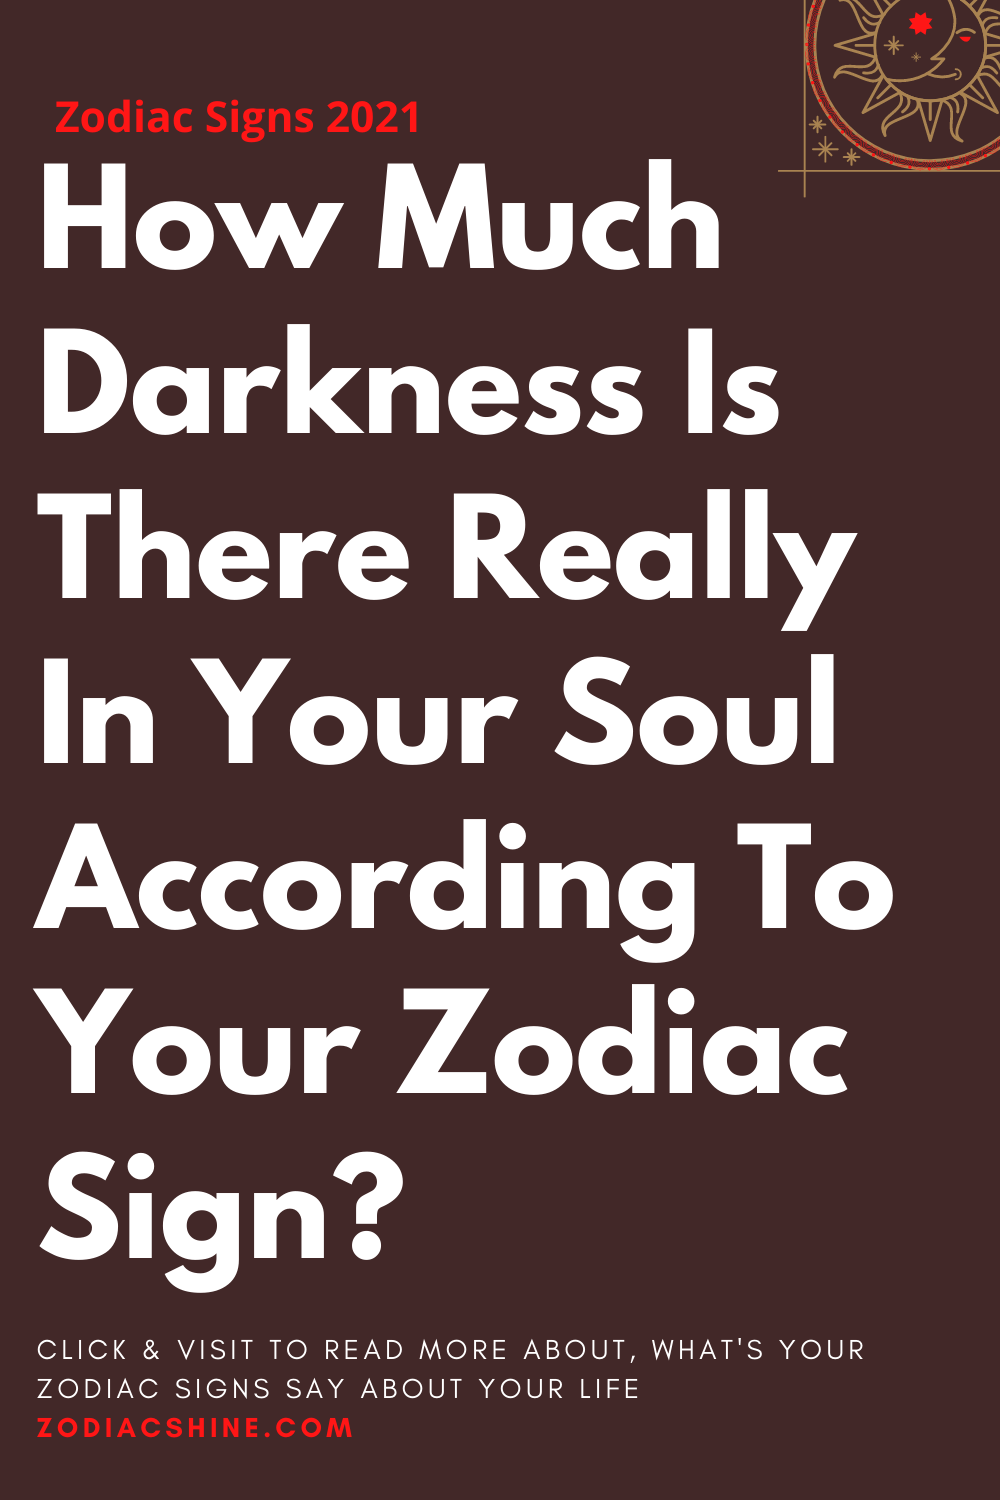 How Much Darkness Is There Really In Your Soul According To Your Zodiac Sign?